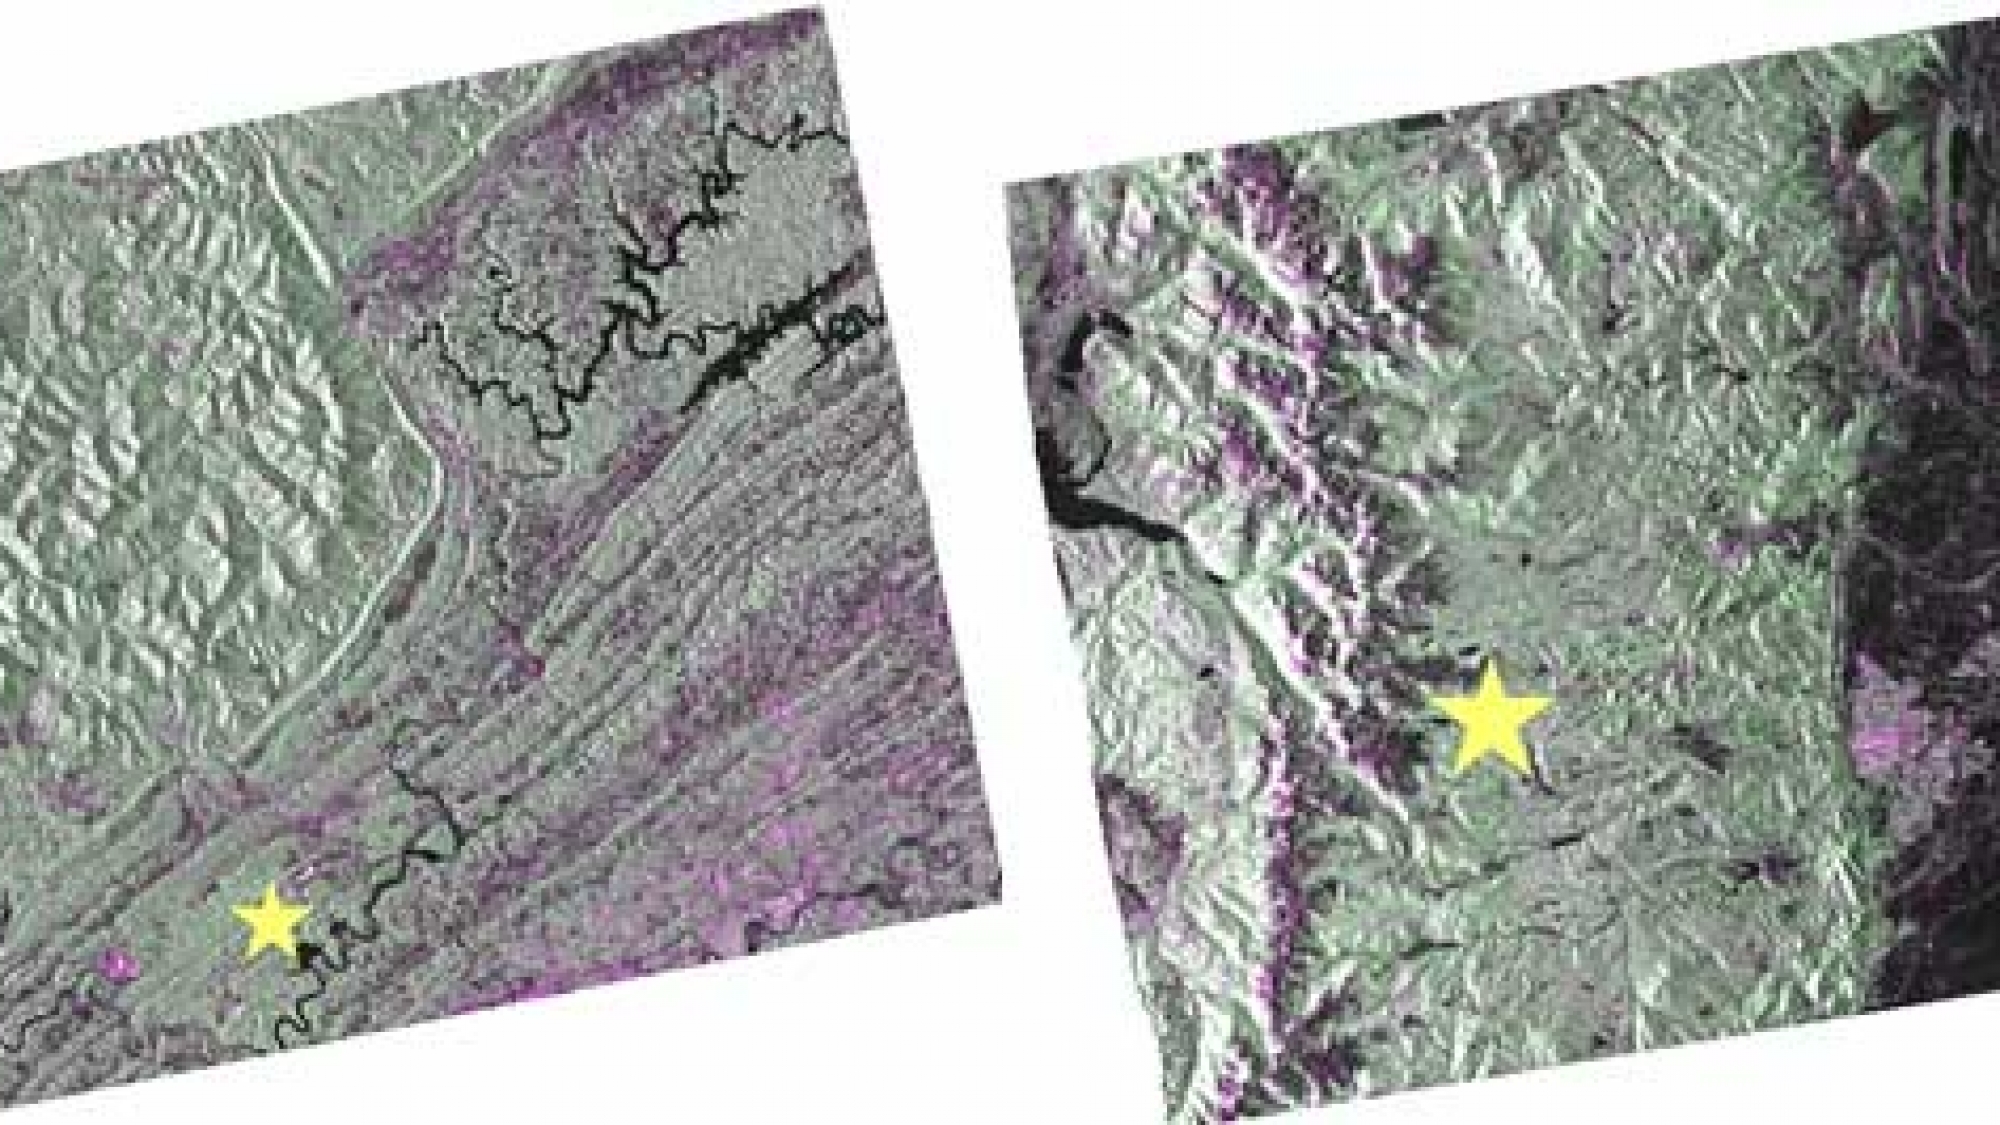 SAR images for (a) Walker Branch Watershed, Tennessee, and (b) Niwot Ridge, Colorado, sites. In SAR visualizations for land use, green usually represents tree canopy, pink is crop or barren soil, black is water, and grays are low vegetation. The star icon indicates the location of the field site.